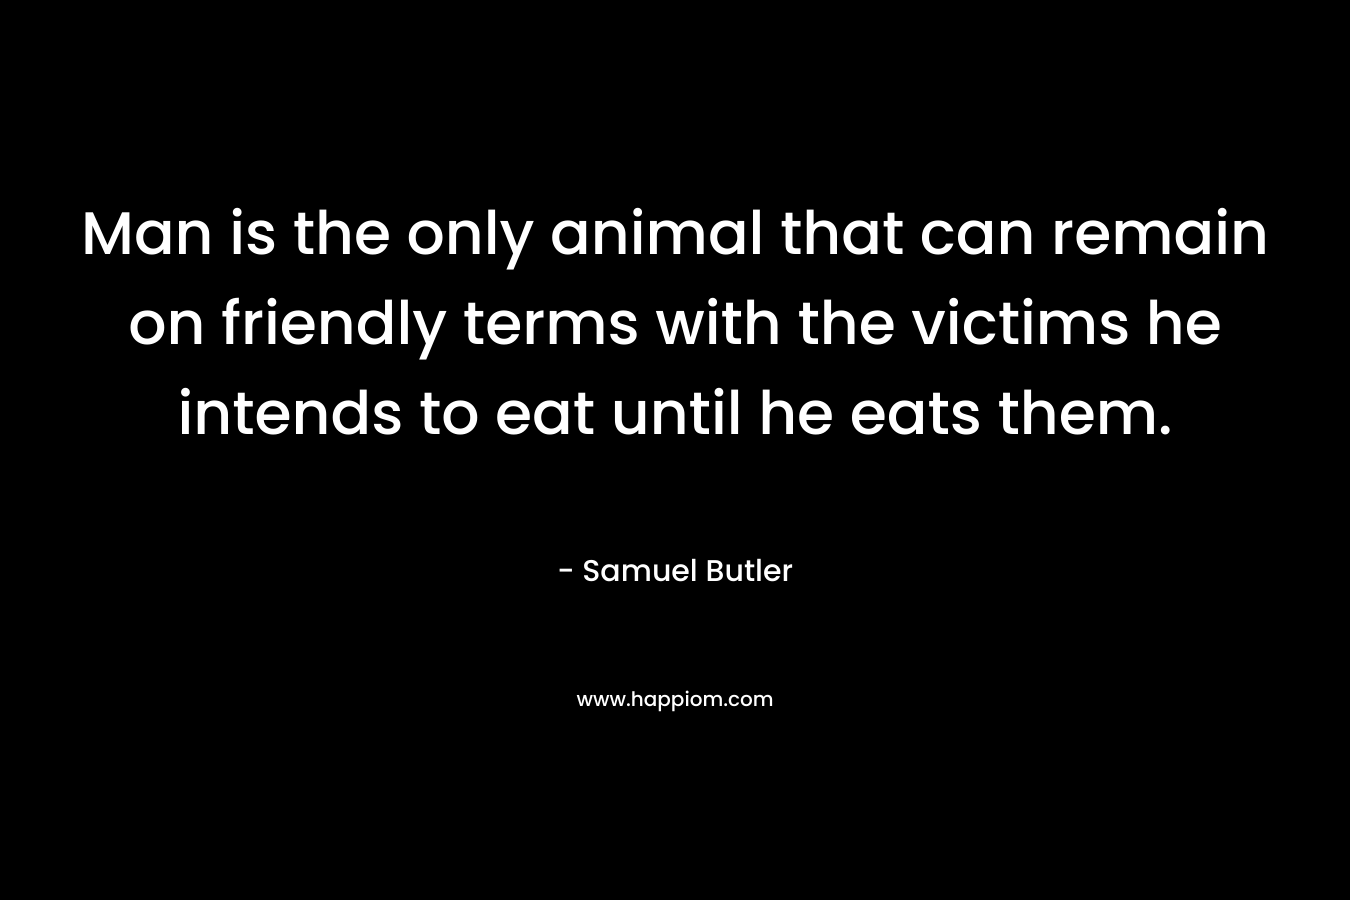 Man is the only animal that can remain on friendly terms with the victims he intends to eat until he eats them.